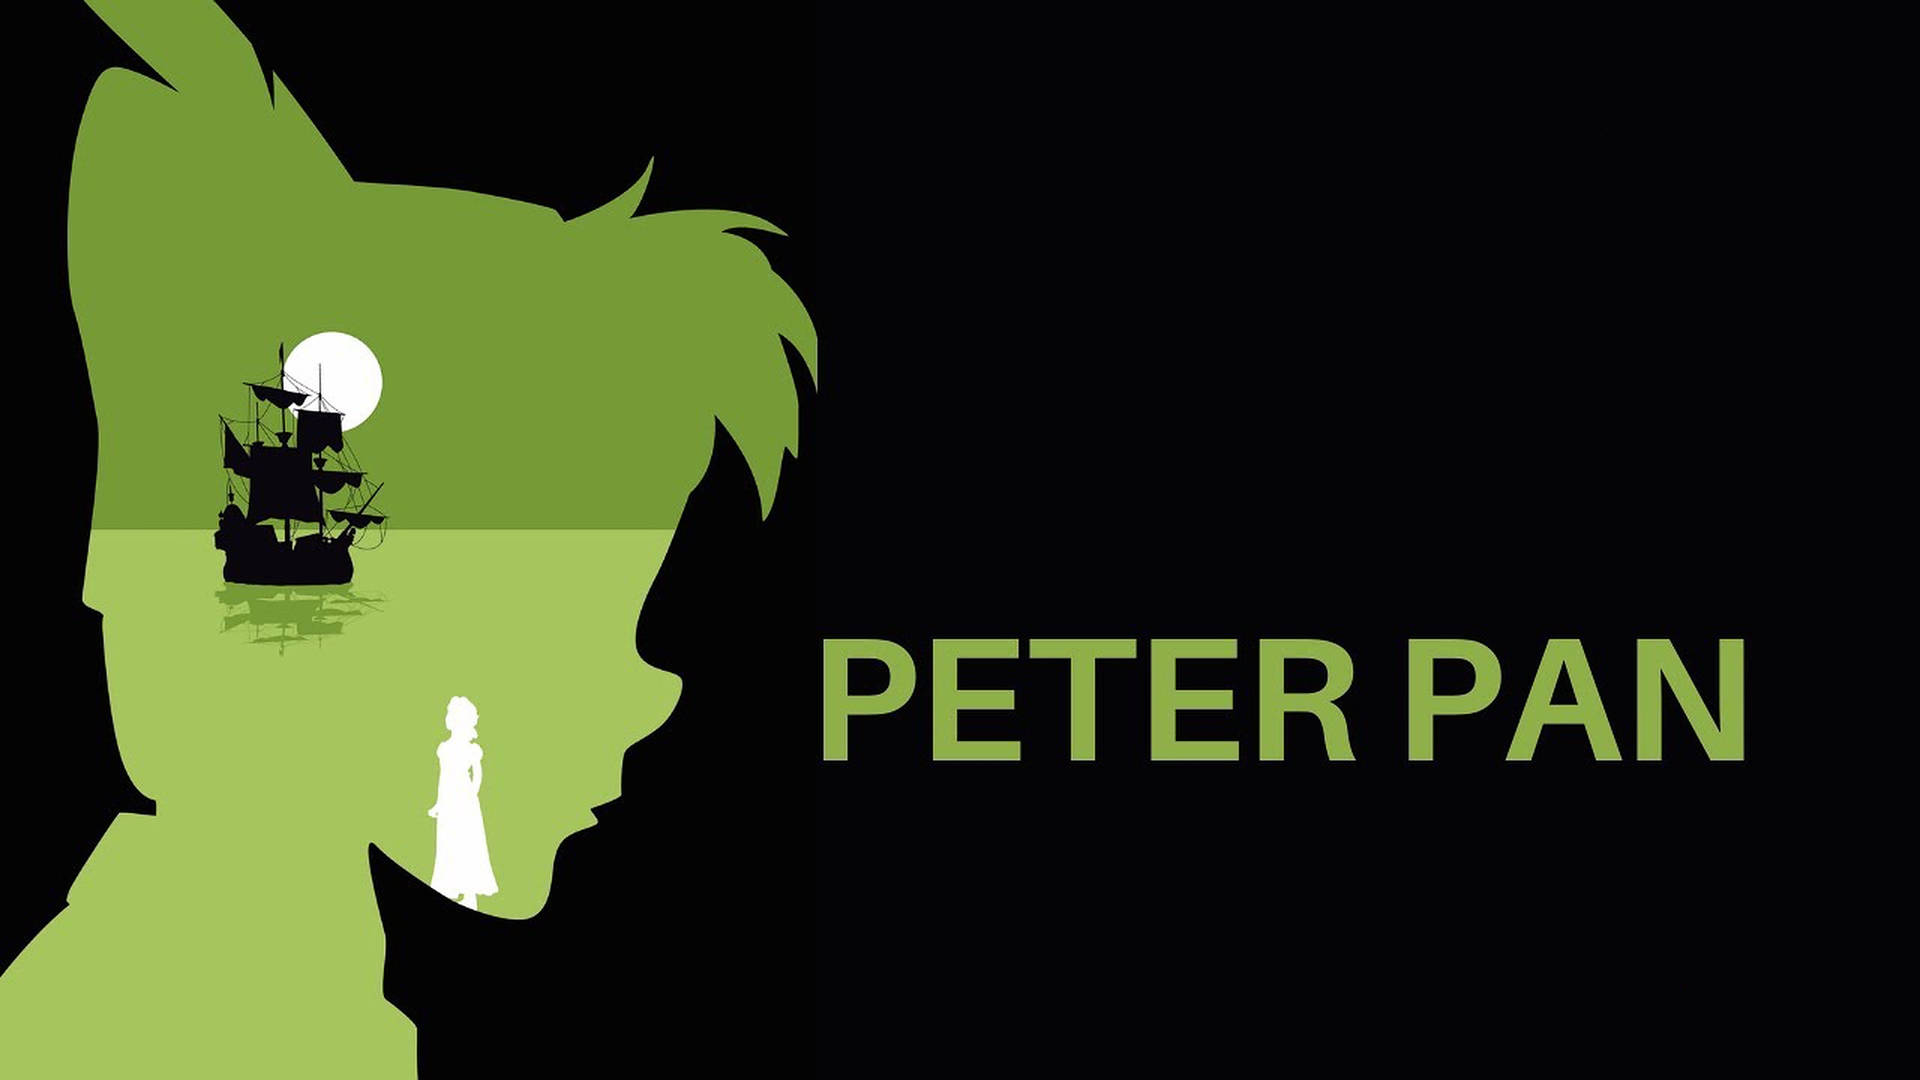 Peter Pan Green Silhouette Background